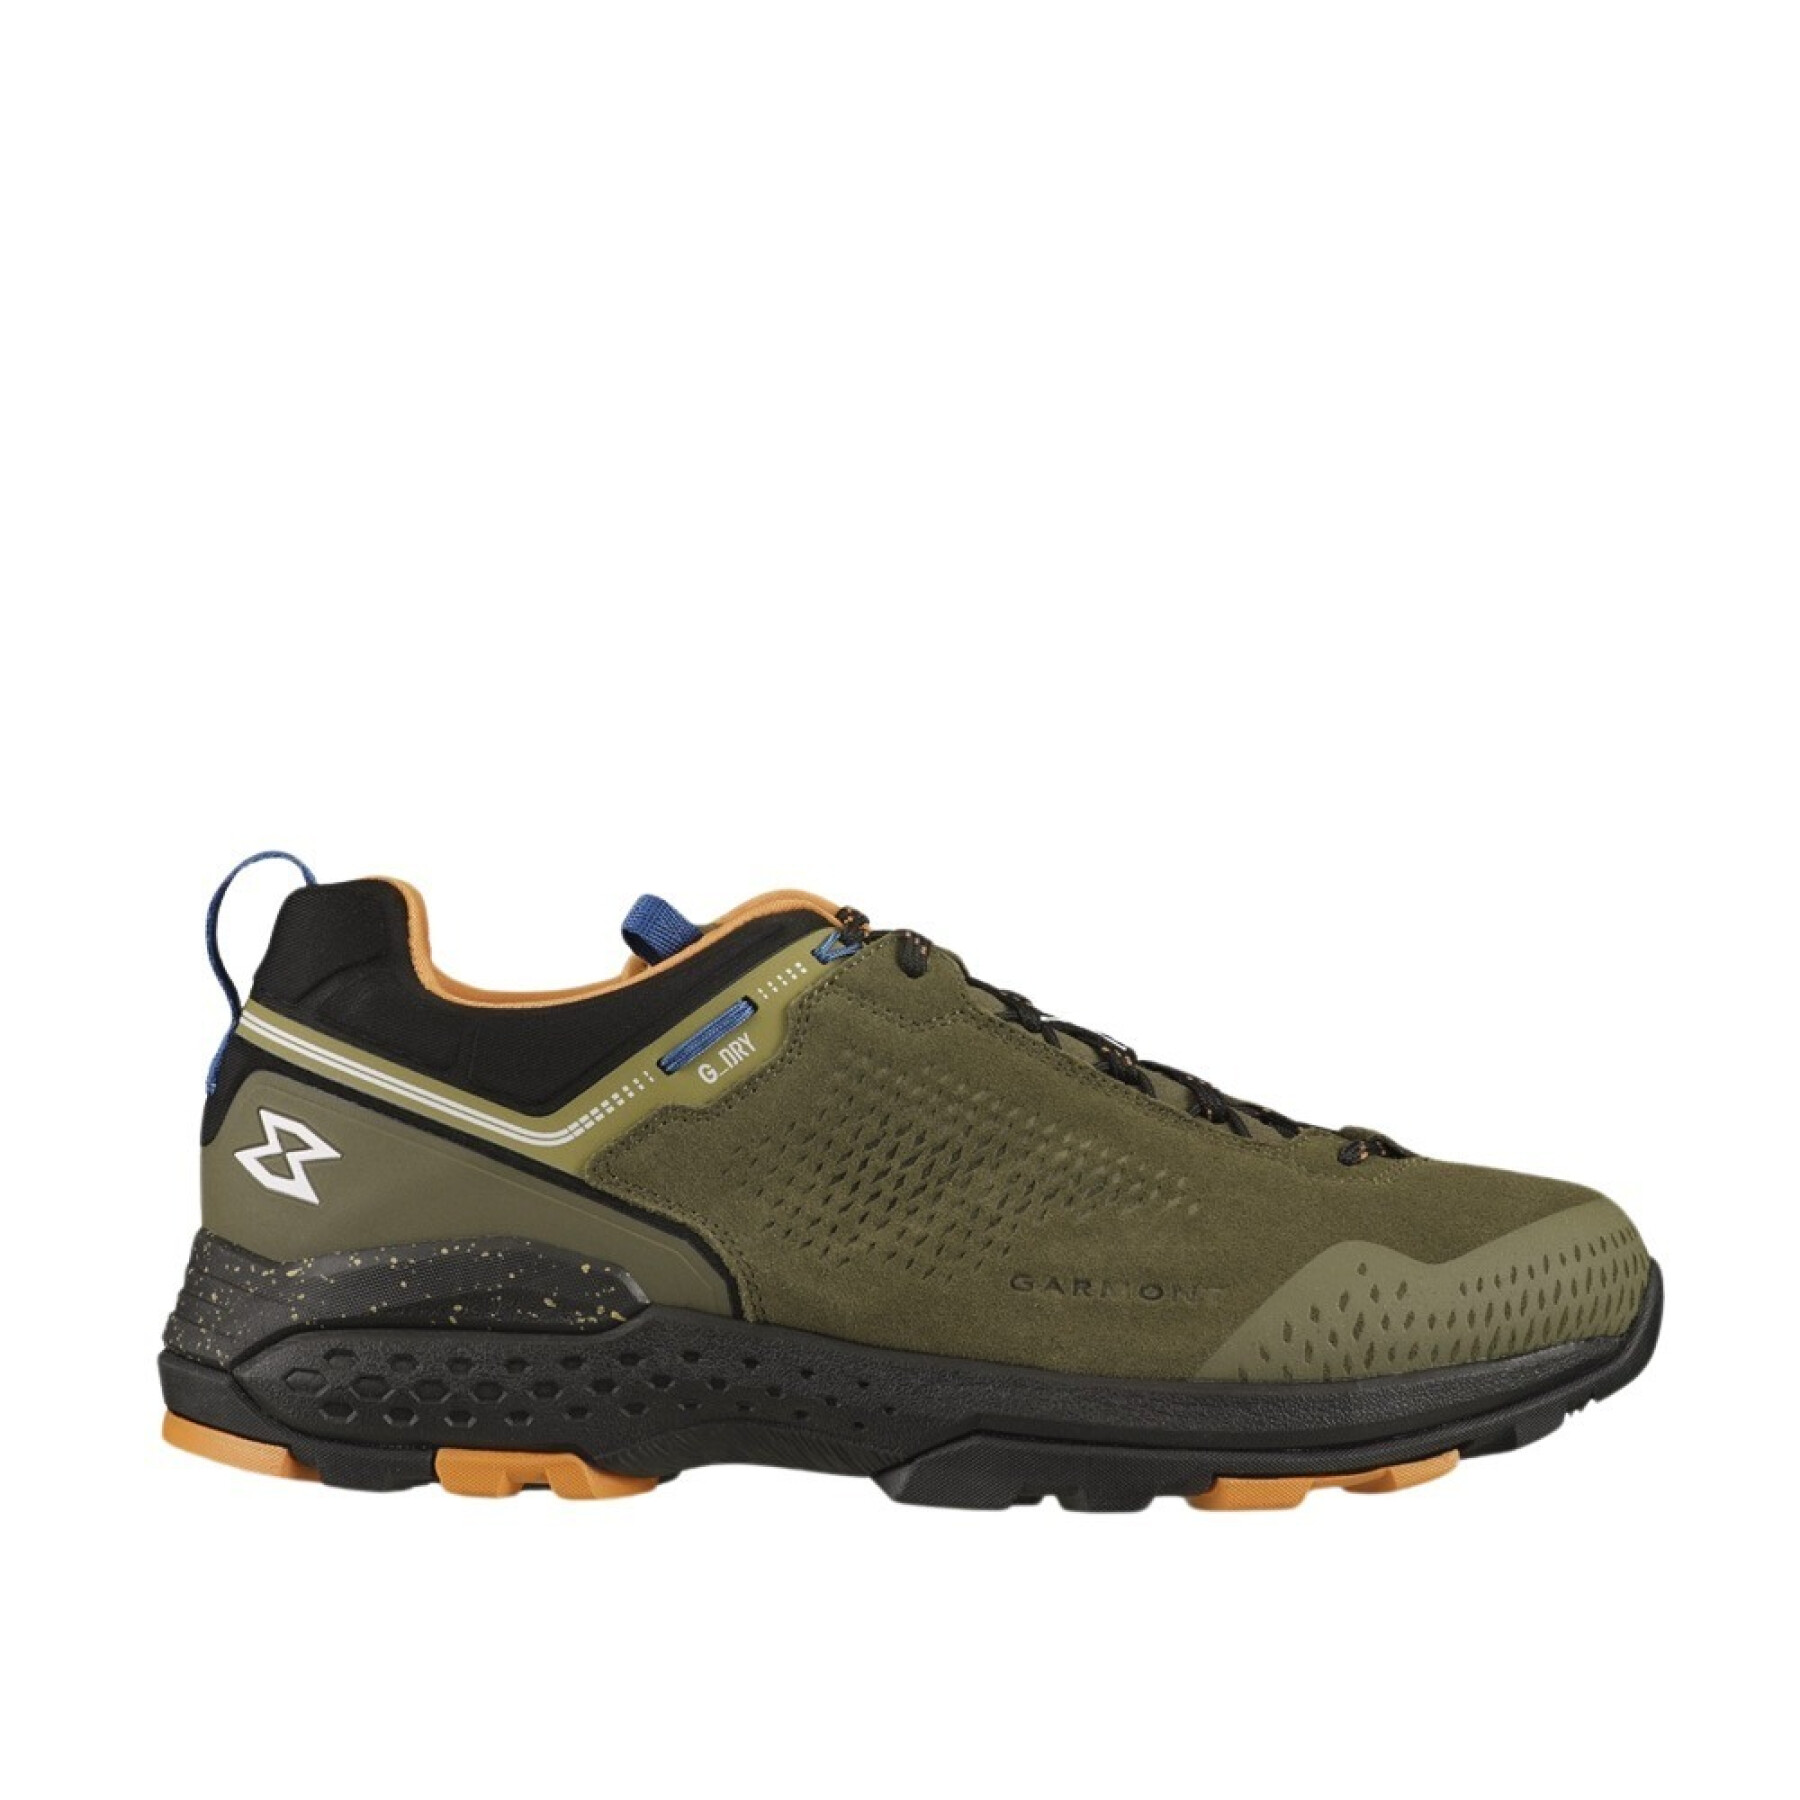 Hiking shoes Garmont Groove G-Dry